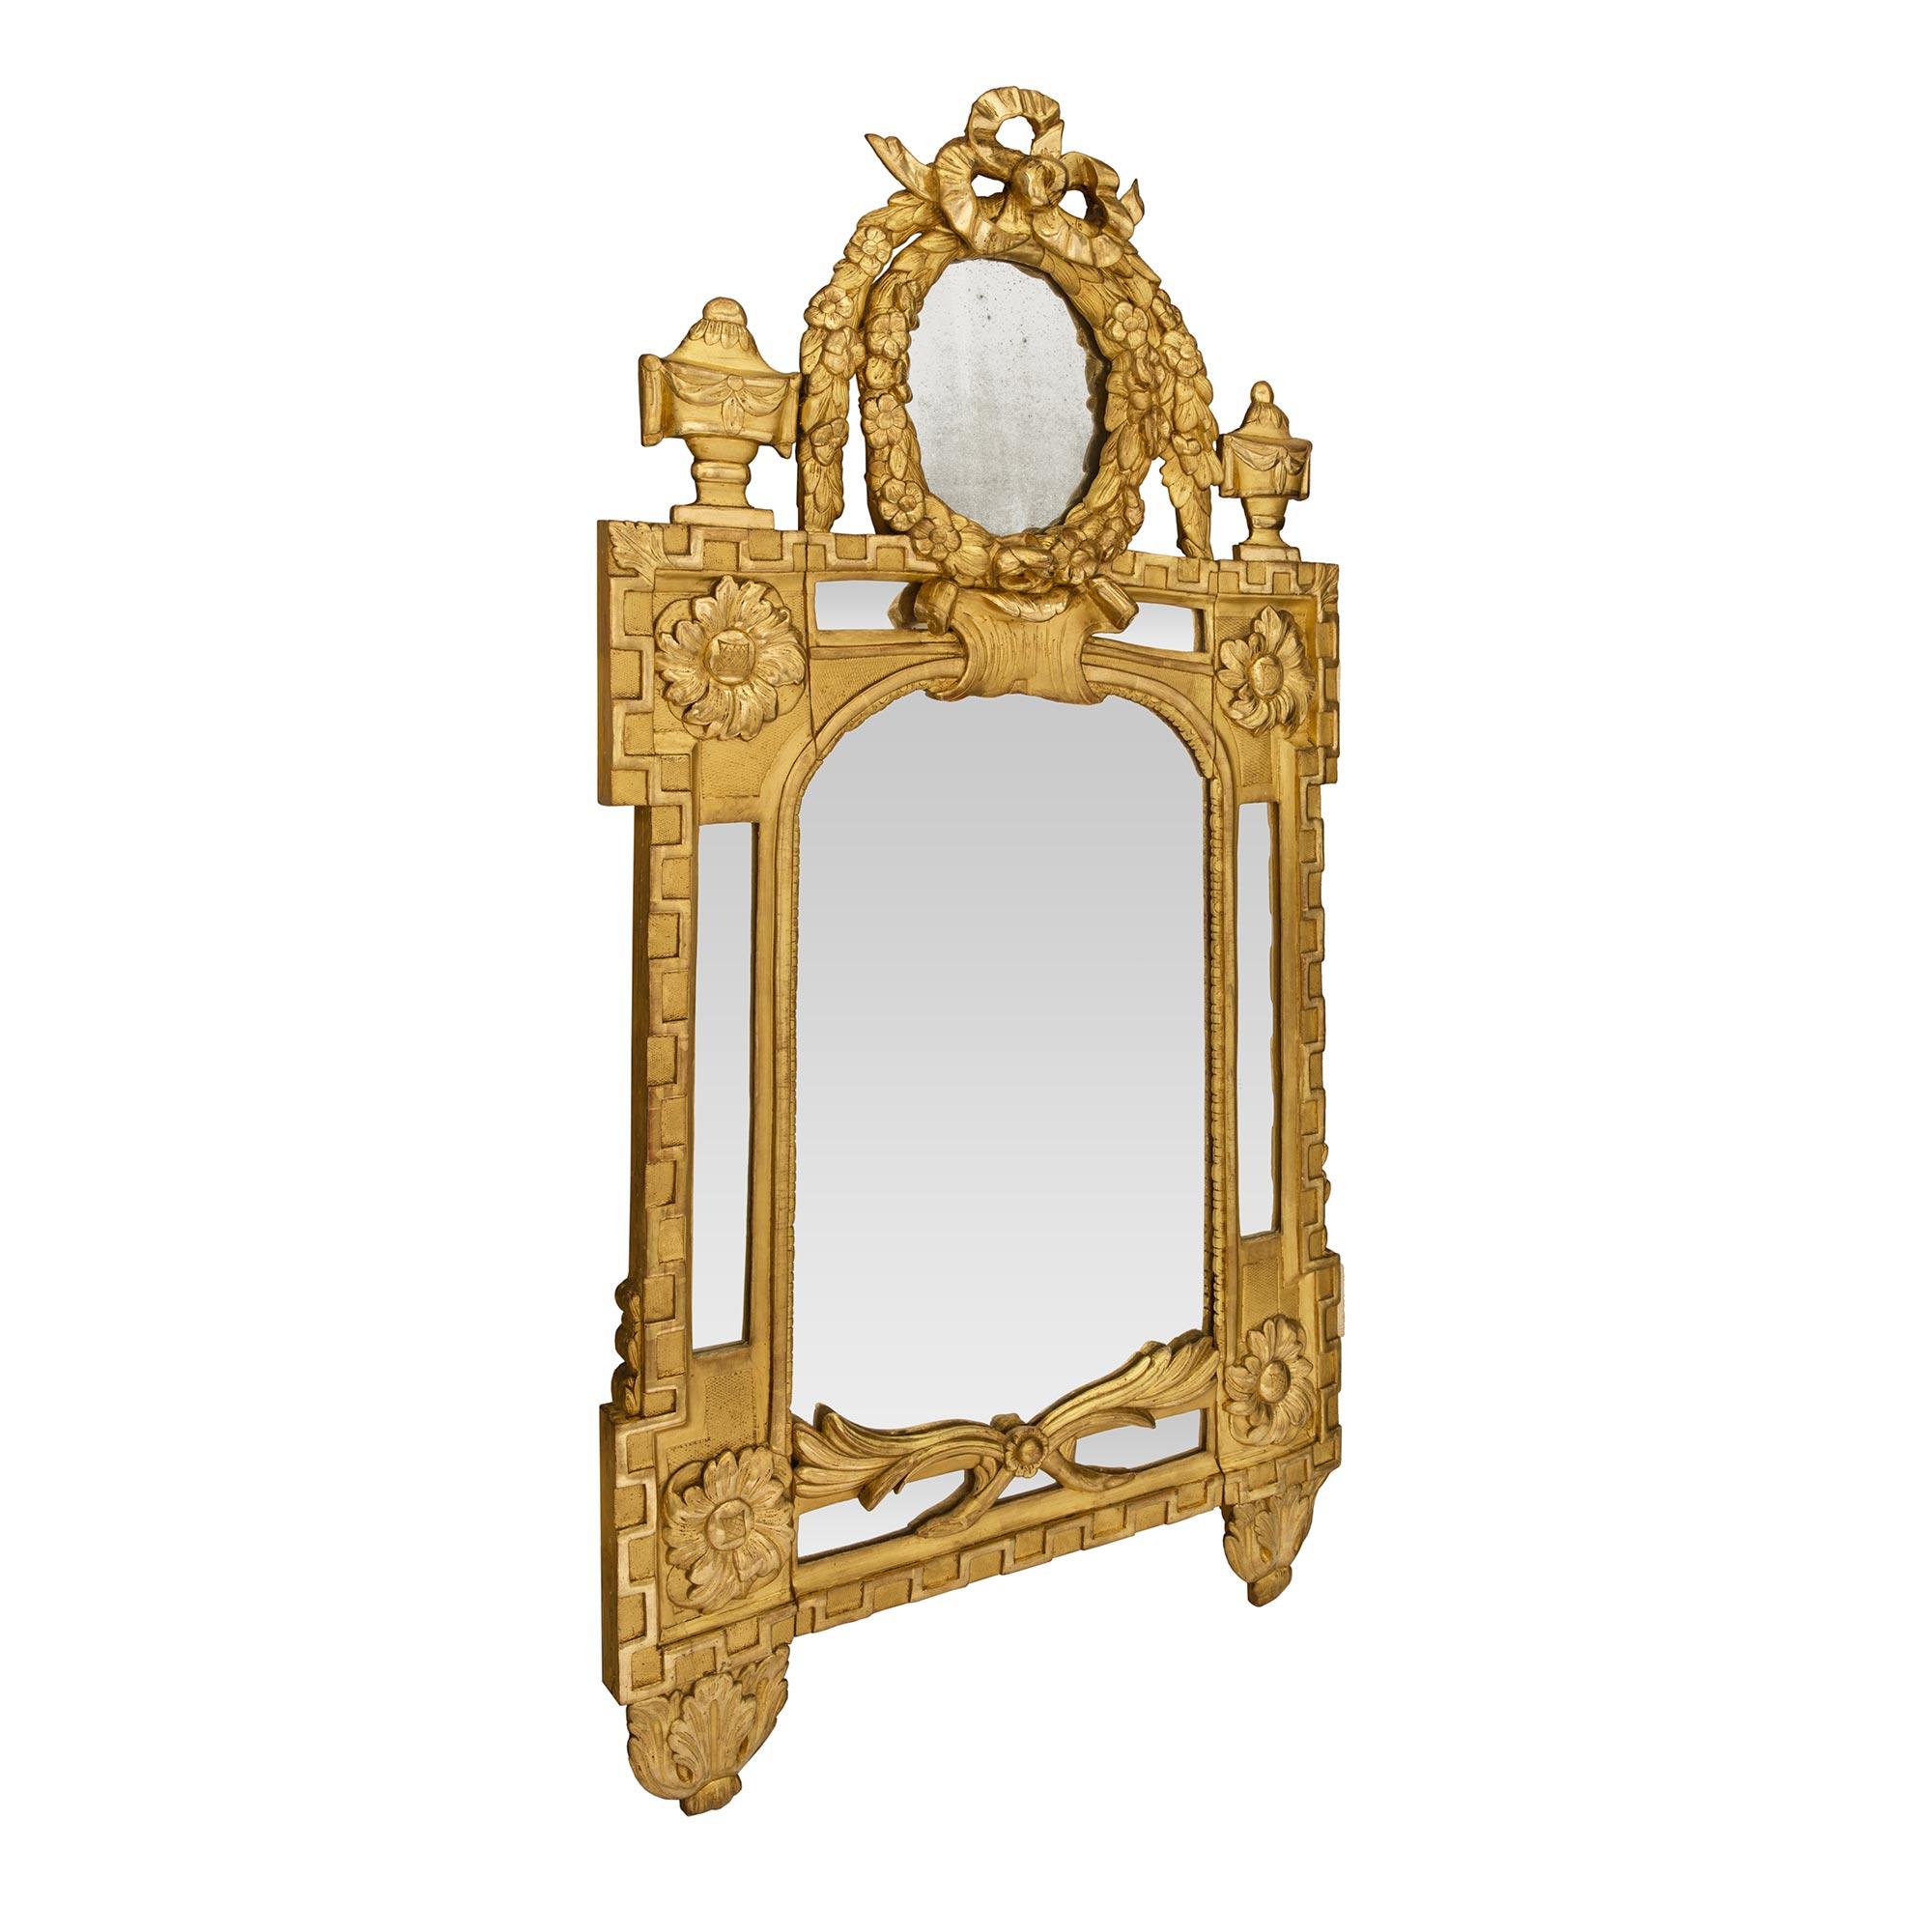 An impressive large scale French early 19th century Louis XVI st. double framed giltwood mirror. The original central mirror plate is framed within a fine mottled border. A beautiful Greek key pattern extends throughout the framed while below are